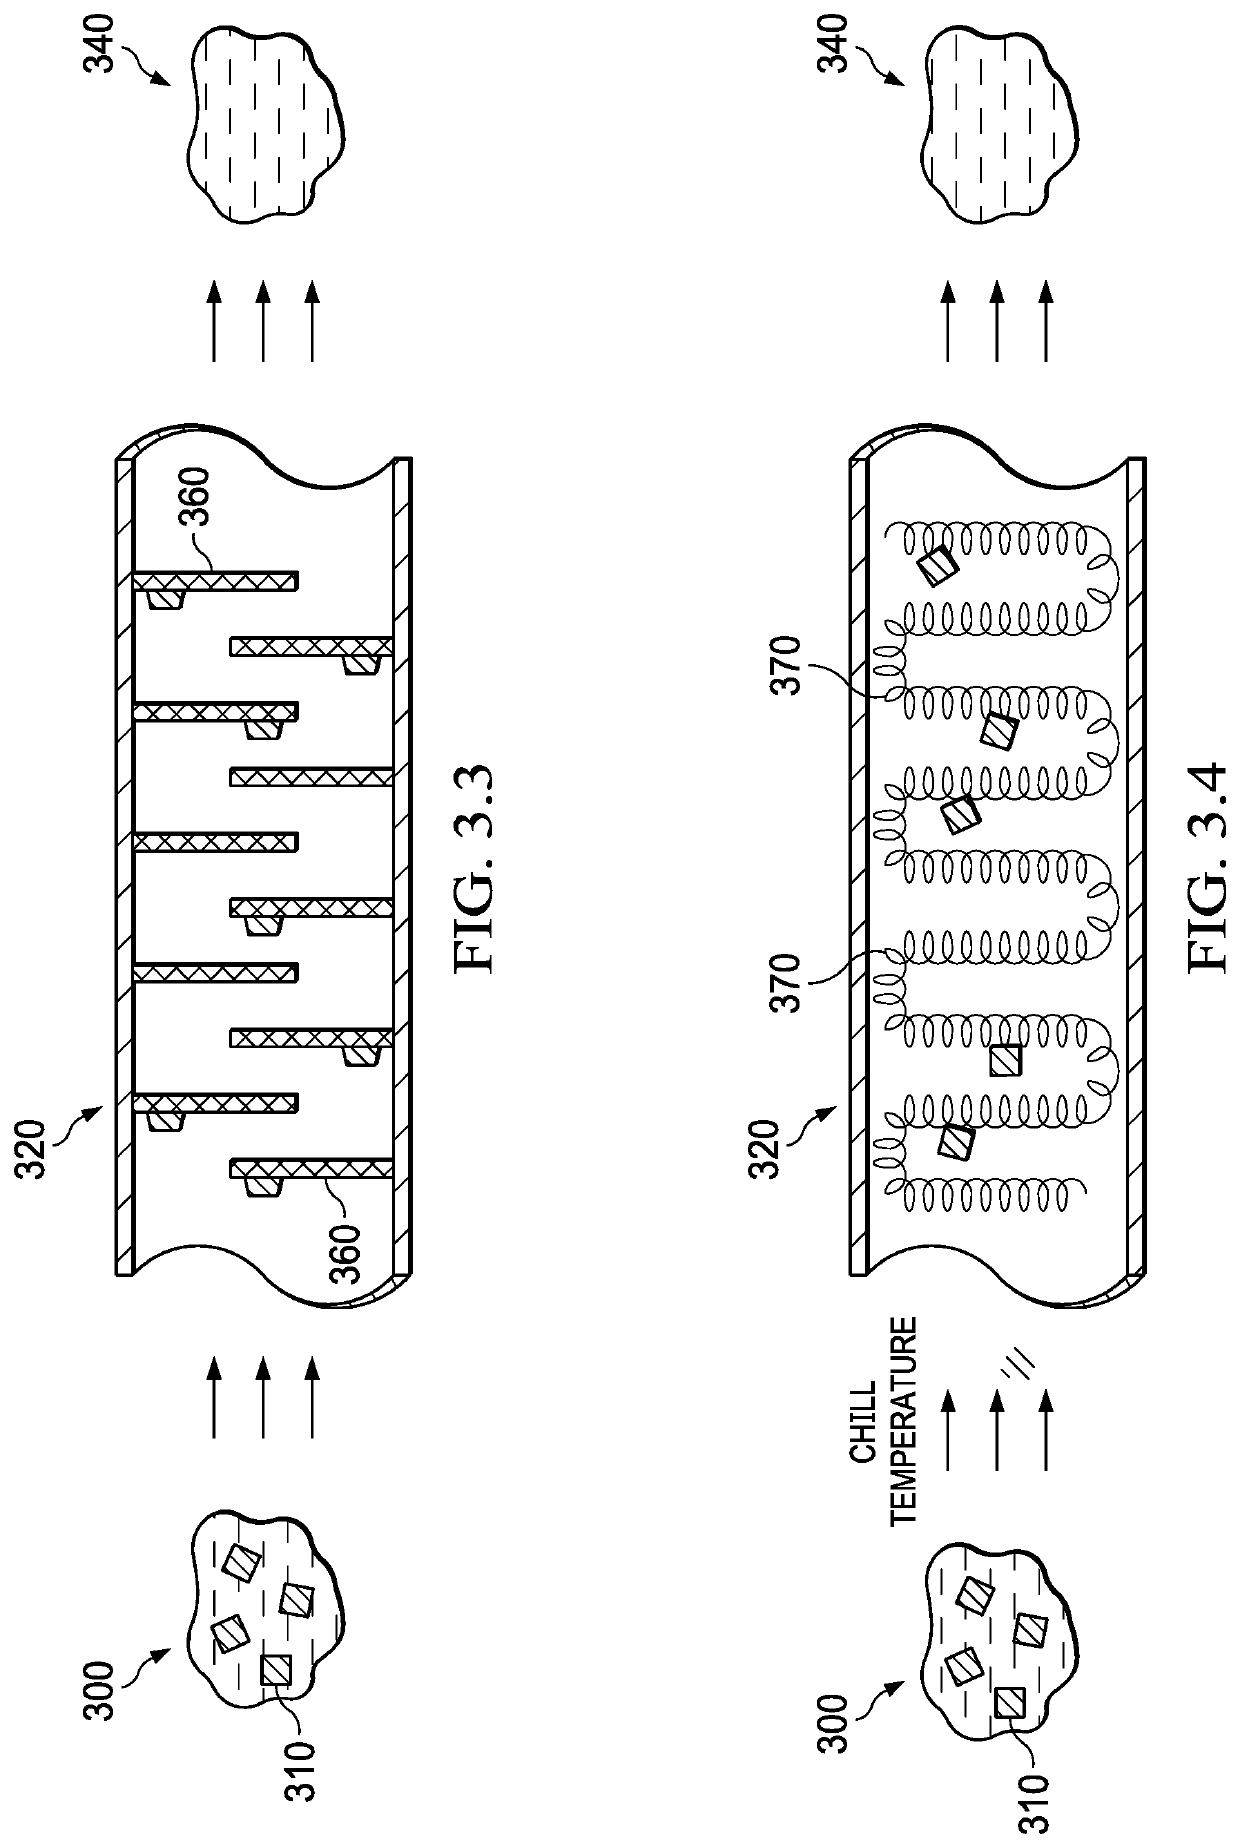 Systems and methods for maintaining chemistry in molten salt systems